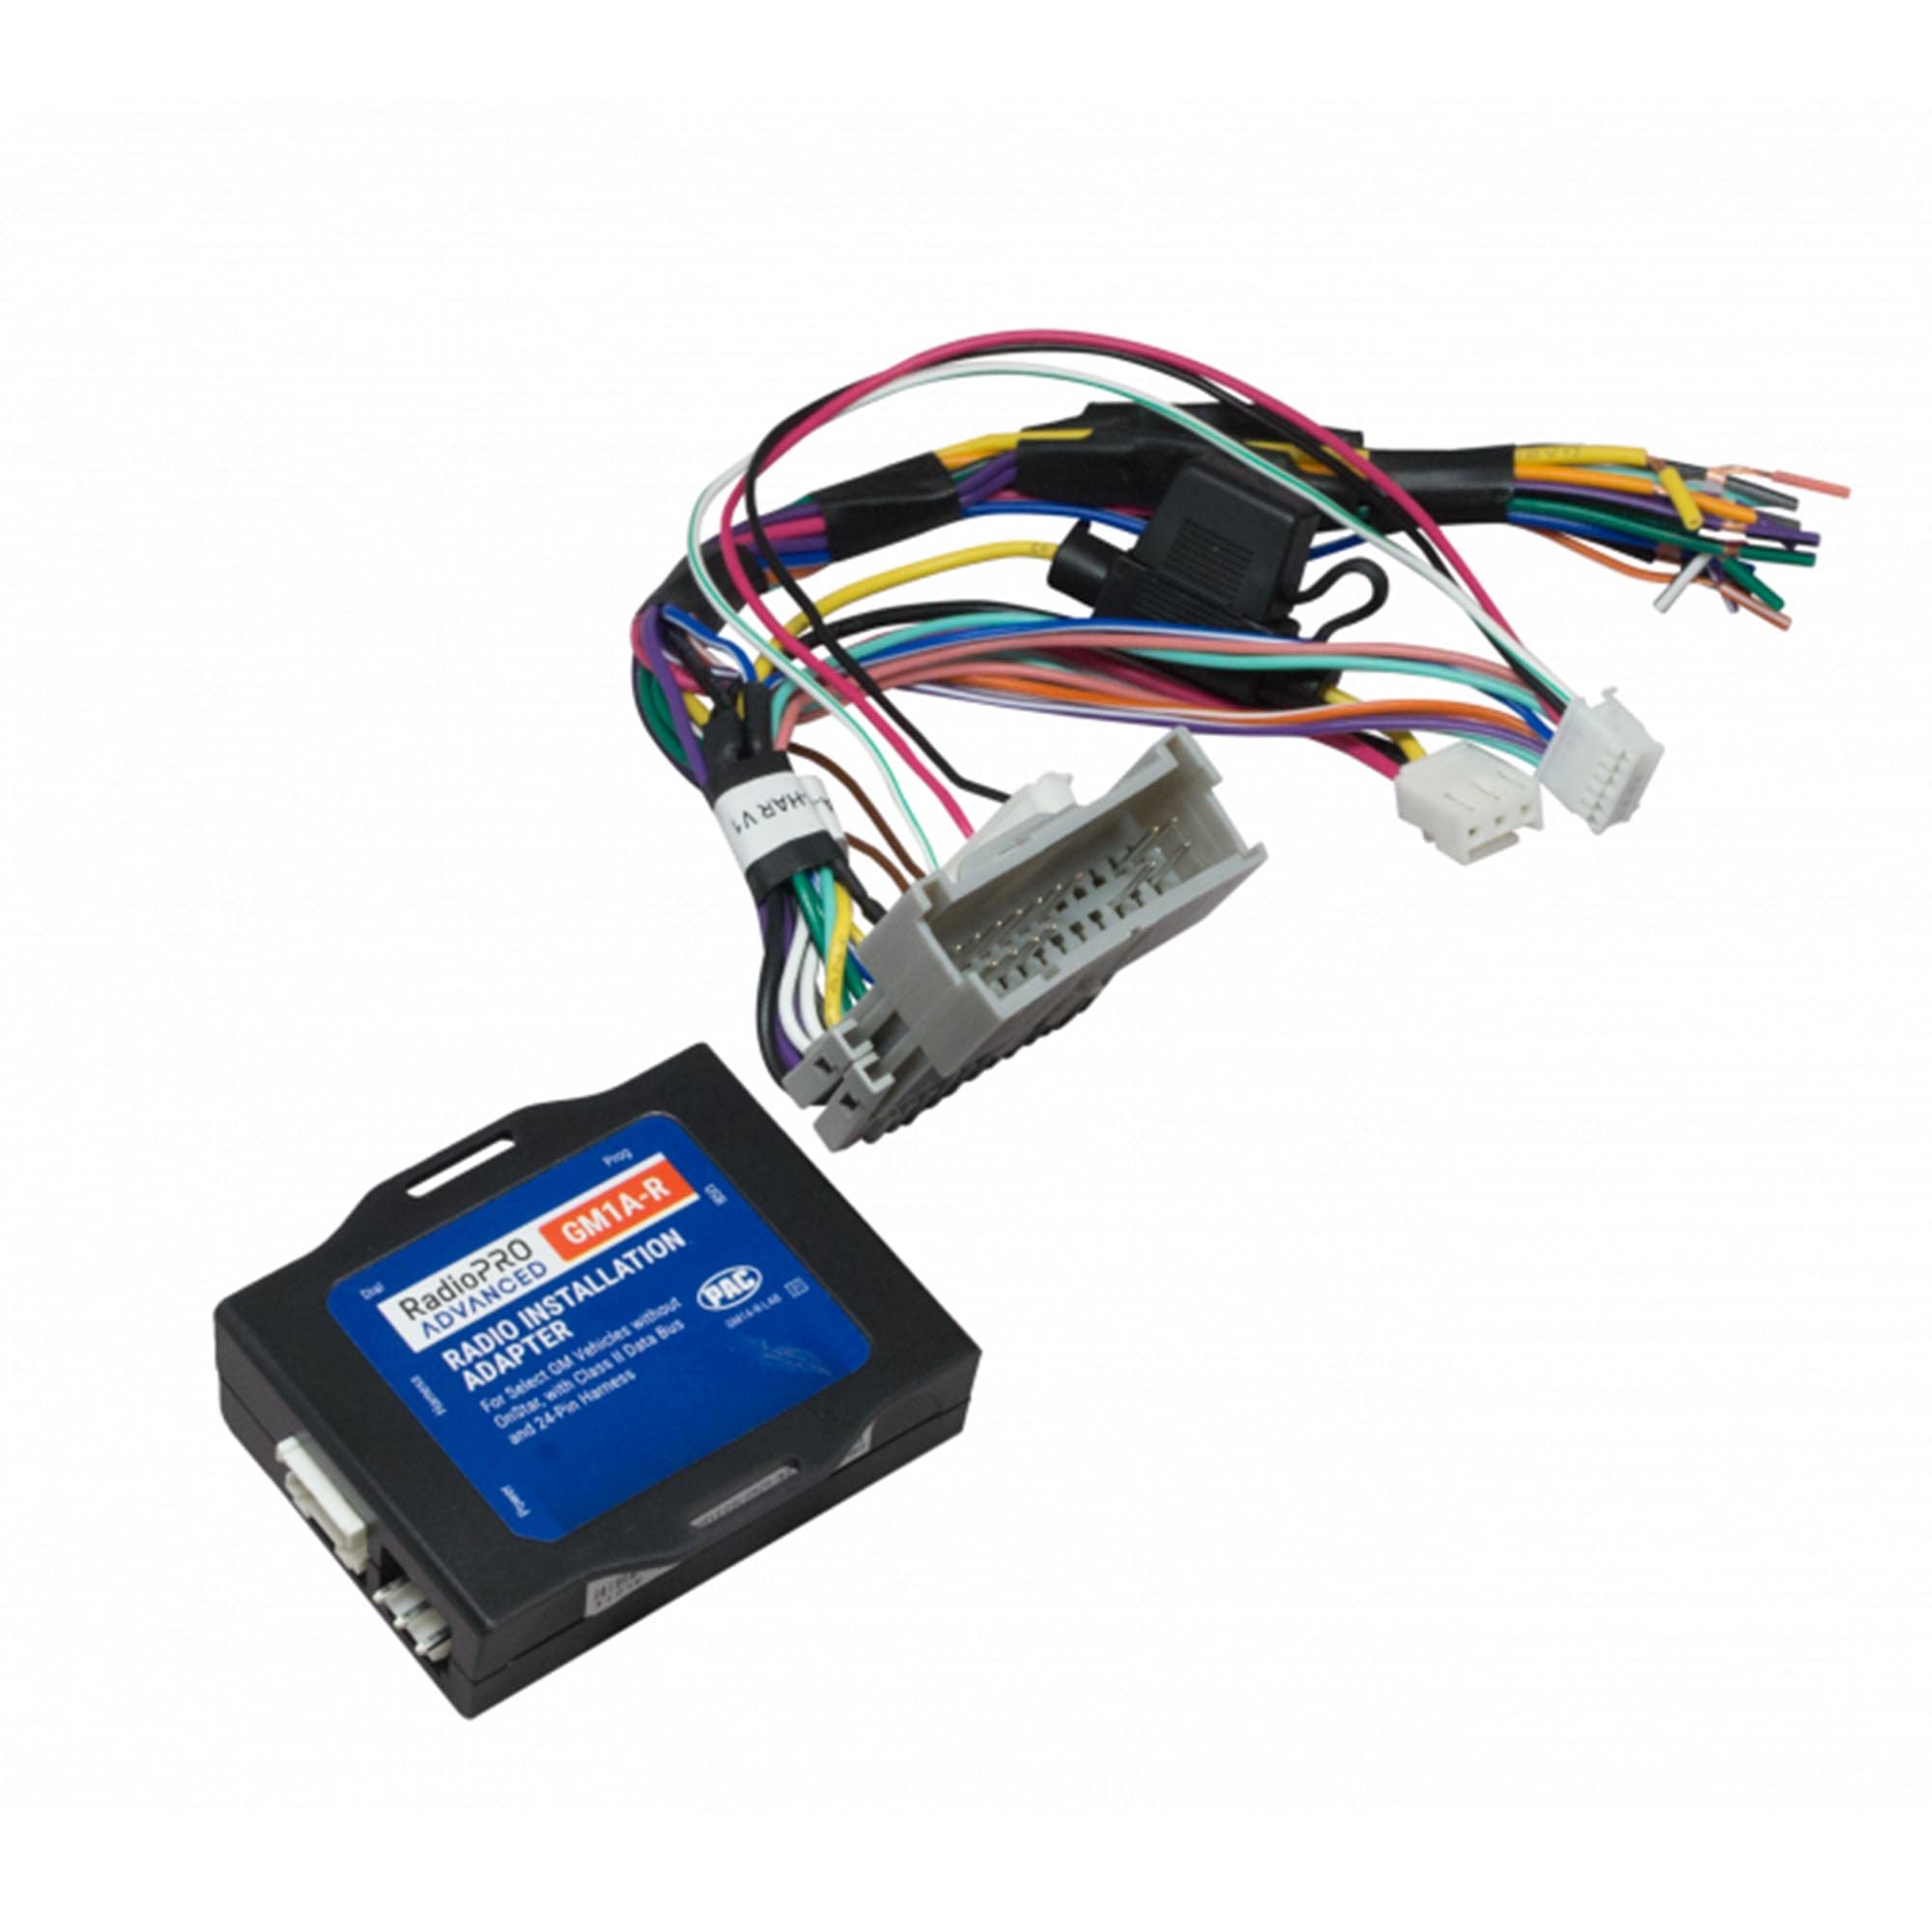 PAC GM1AR / GM1A-R RadioPRO Advanced Interface for General Motors Vehicles